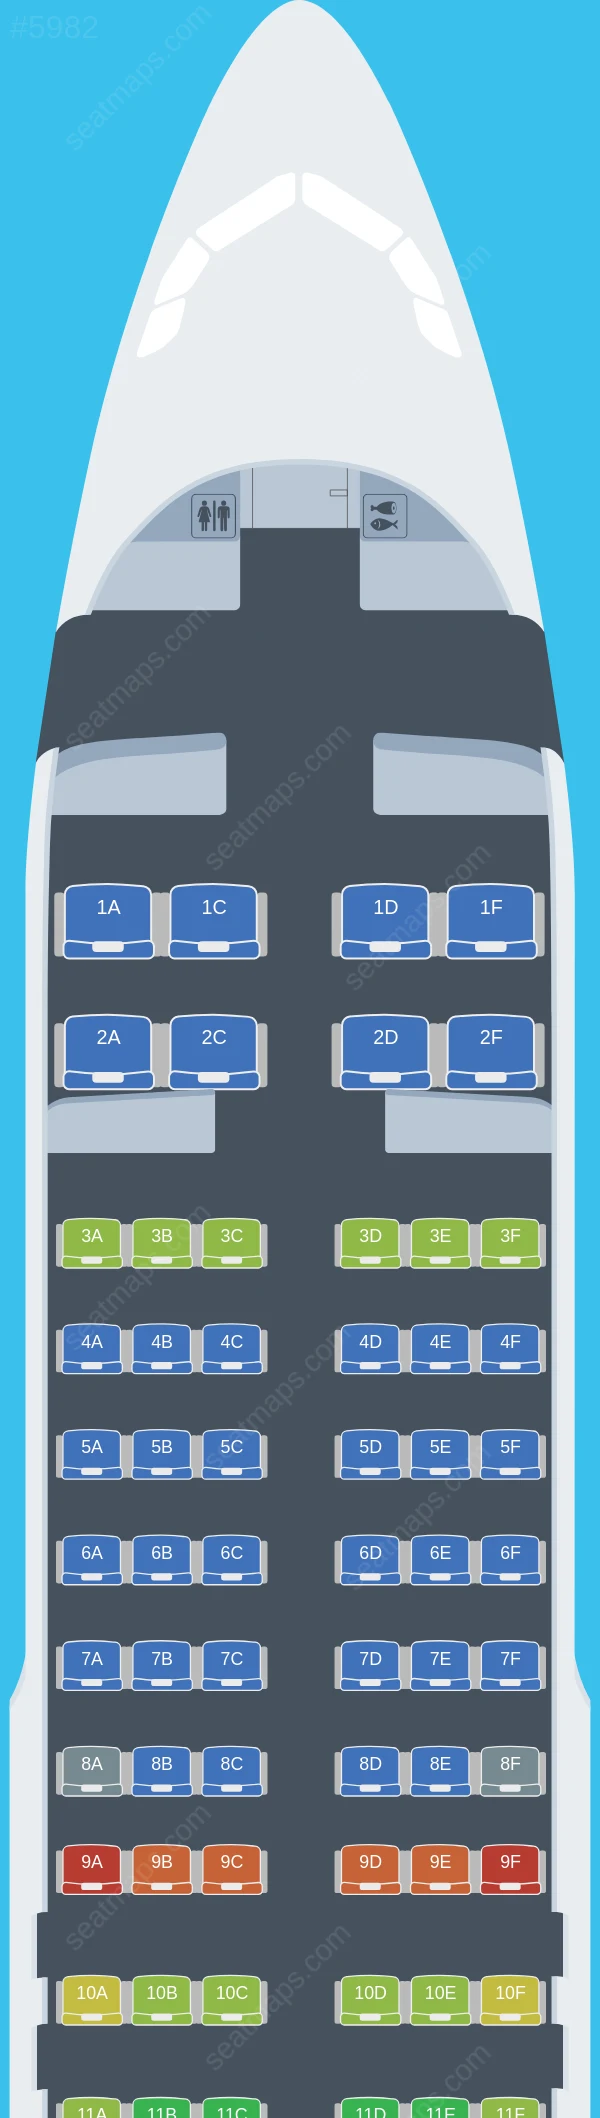 Nepal Airlines Airbus A320-200 seatmap preview